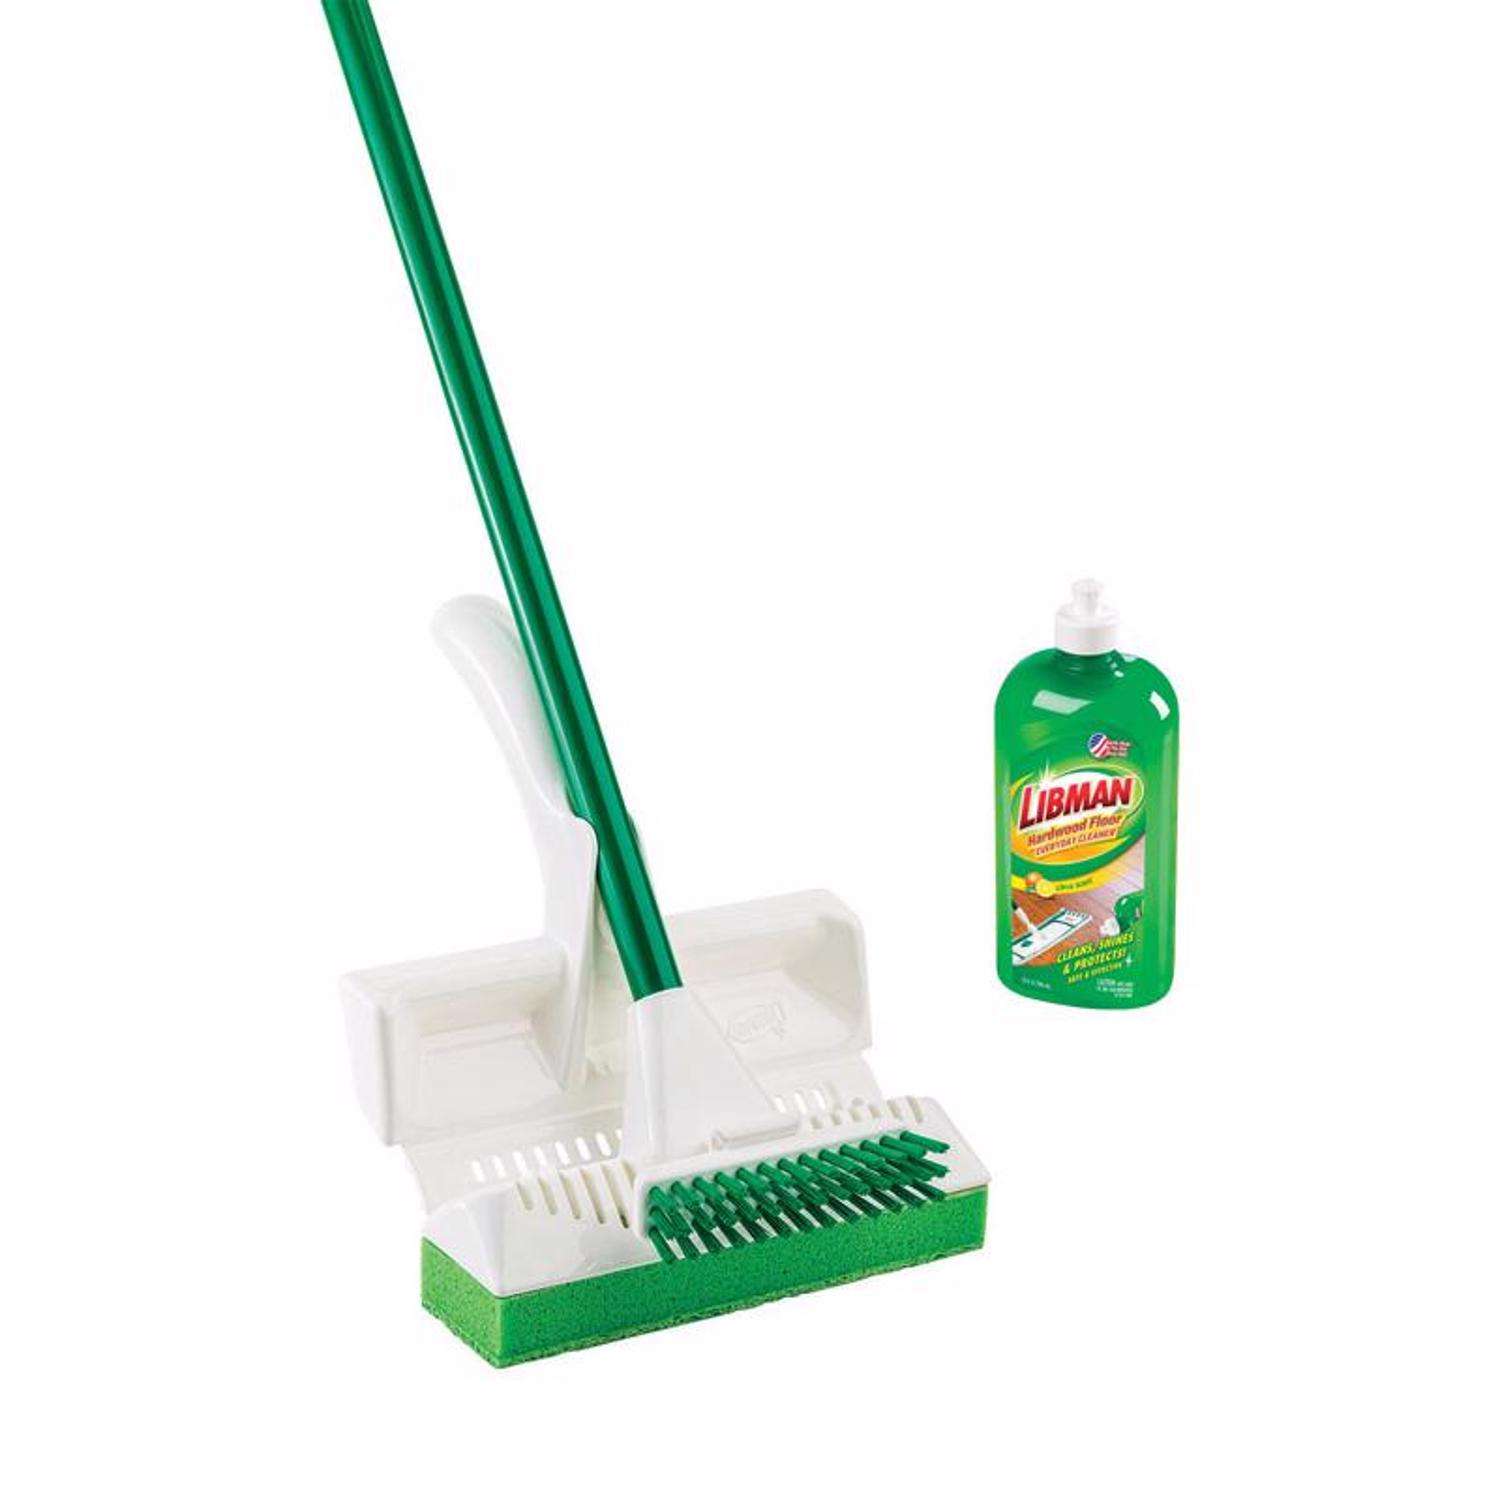 Libman Commercial Glass & Dish Wand with Scrub Brush Refills - 1133 - Pkg Qty 6